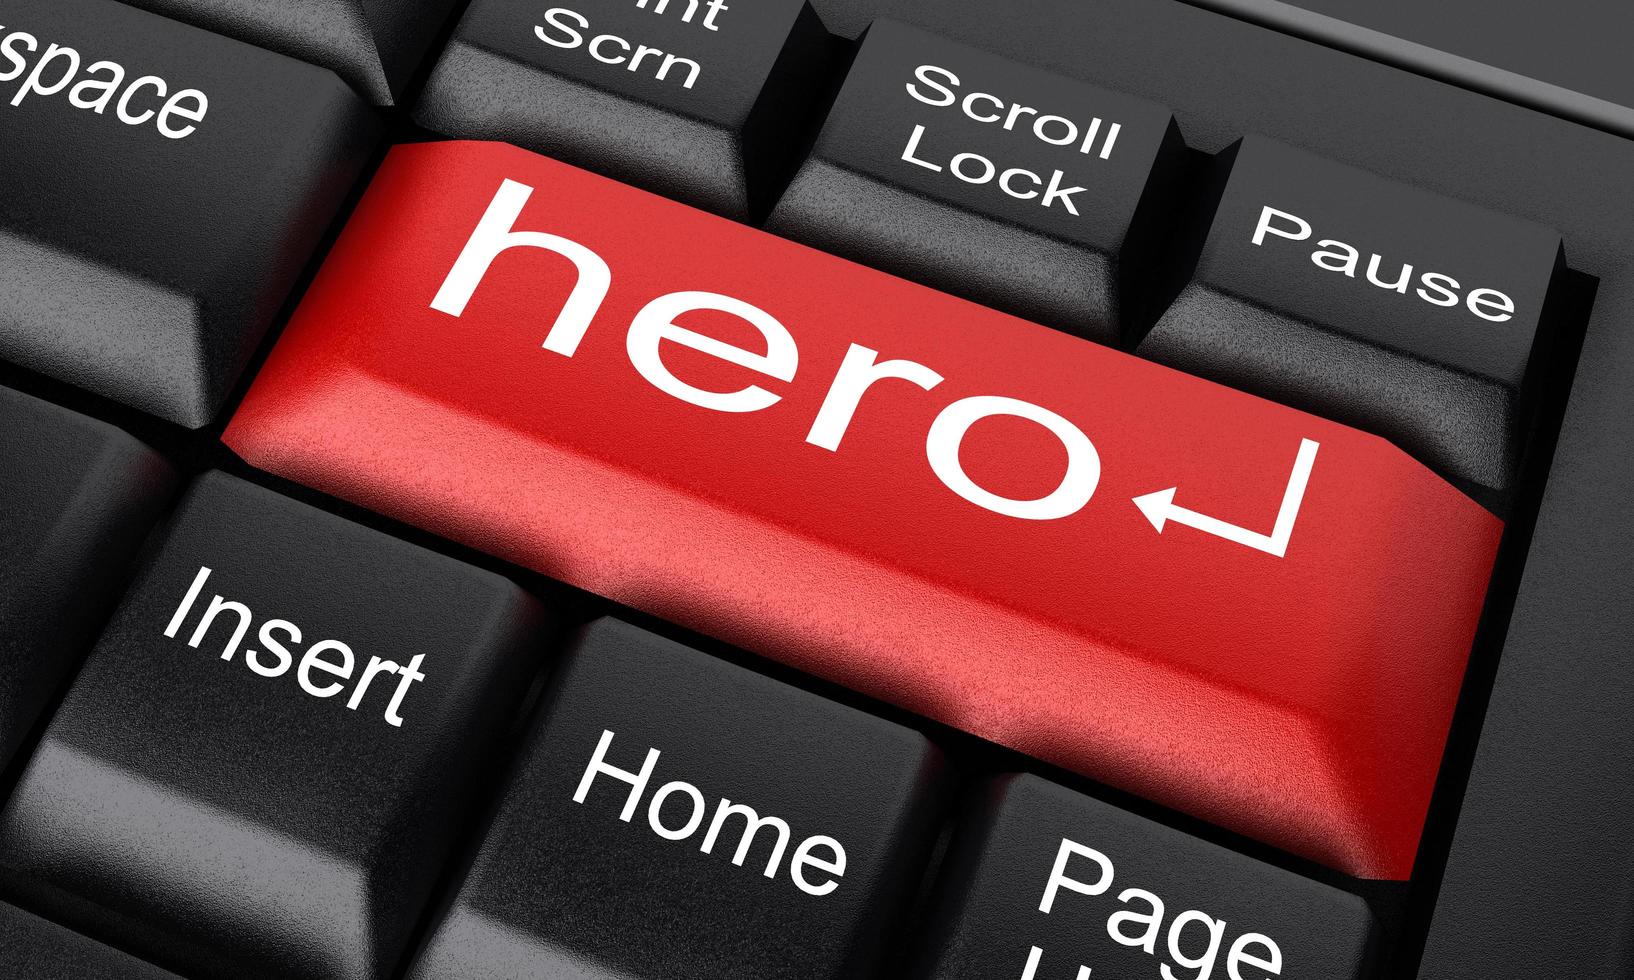 hero word on red keyboard button photo